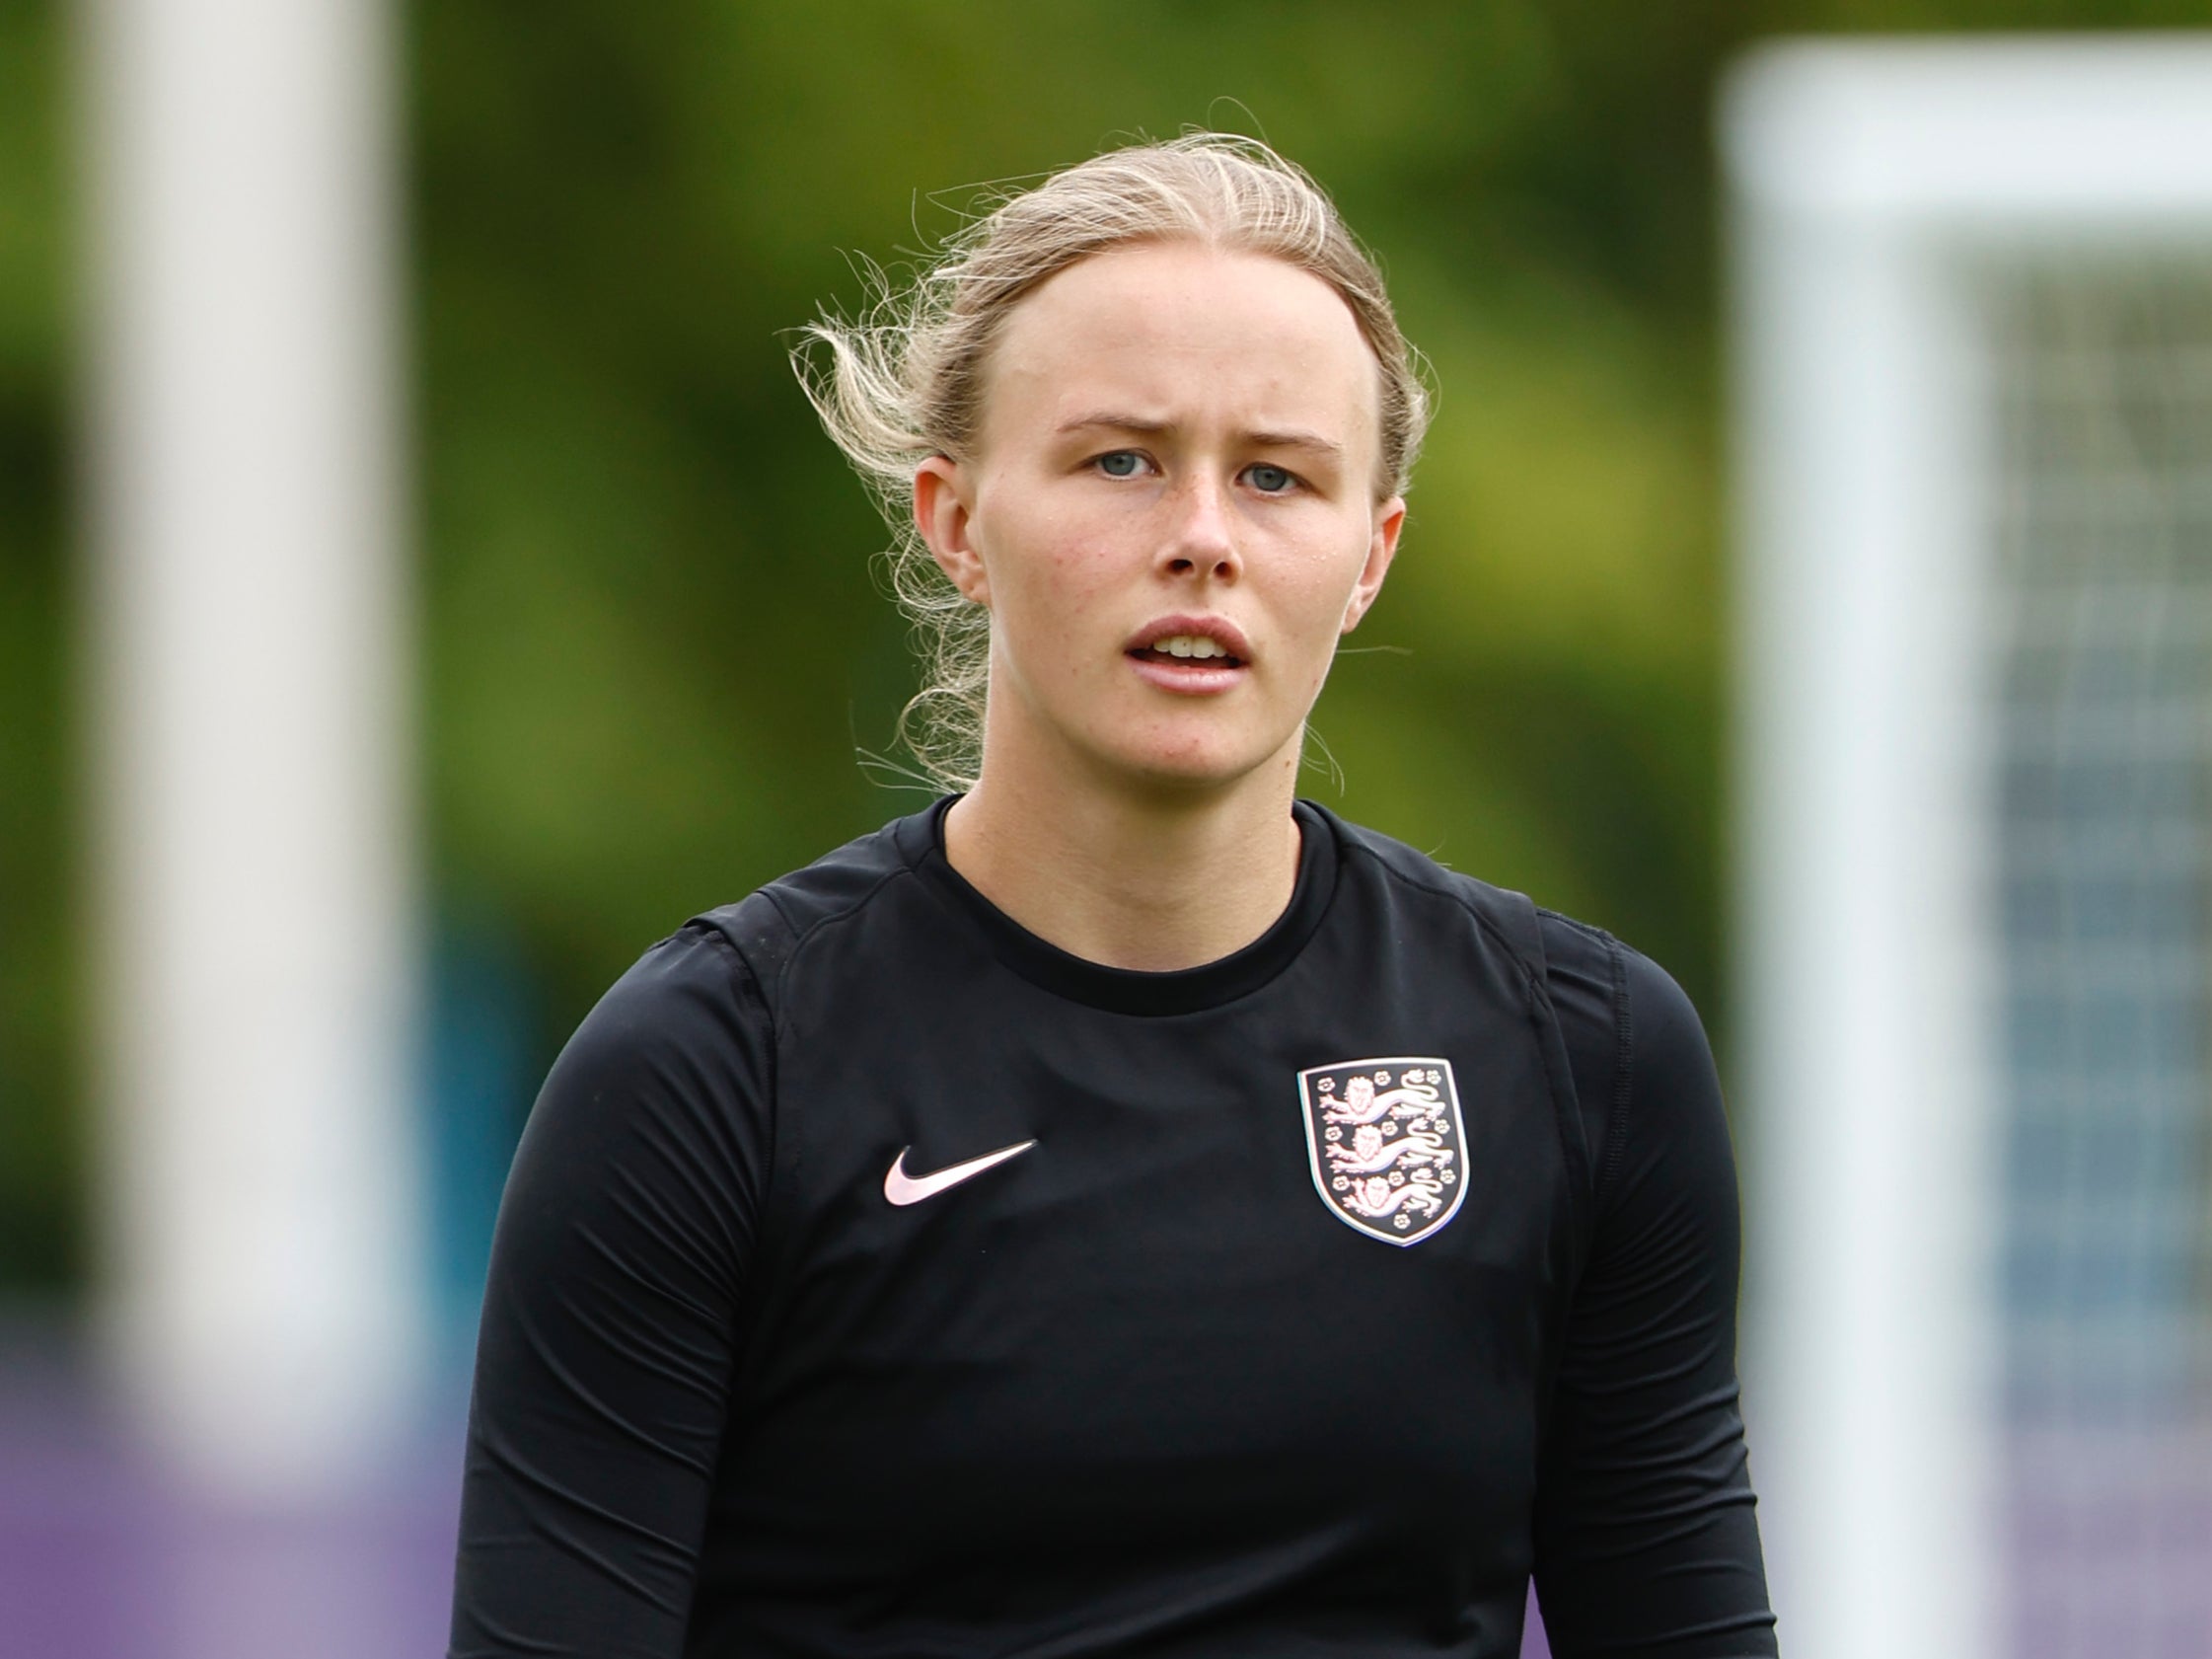 The goalkeeper has been left out of Sarina Wiegman’s latest squad